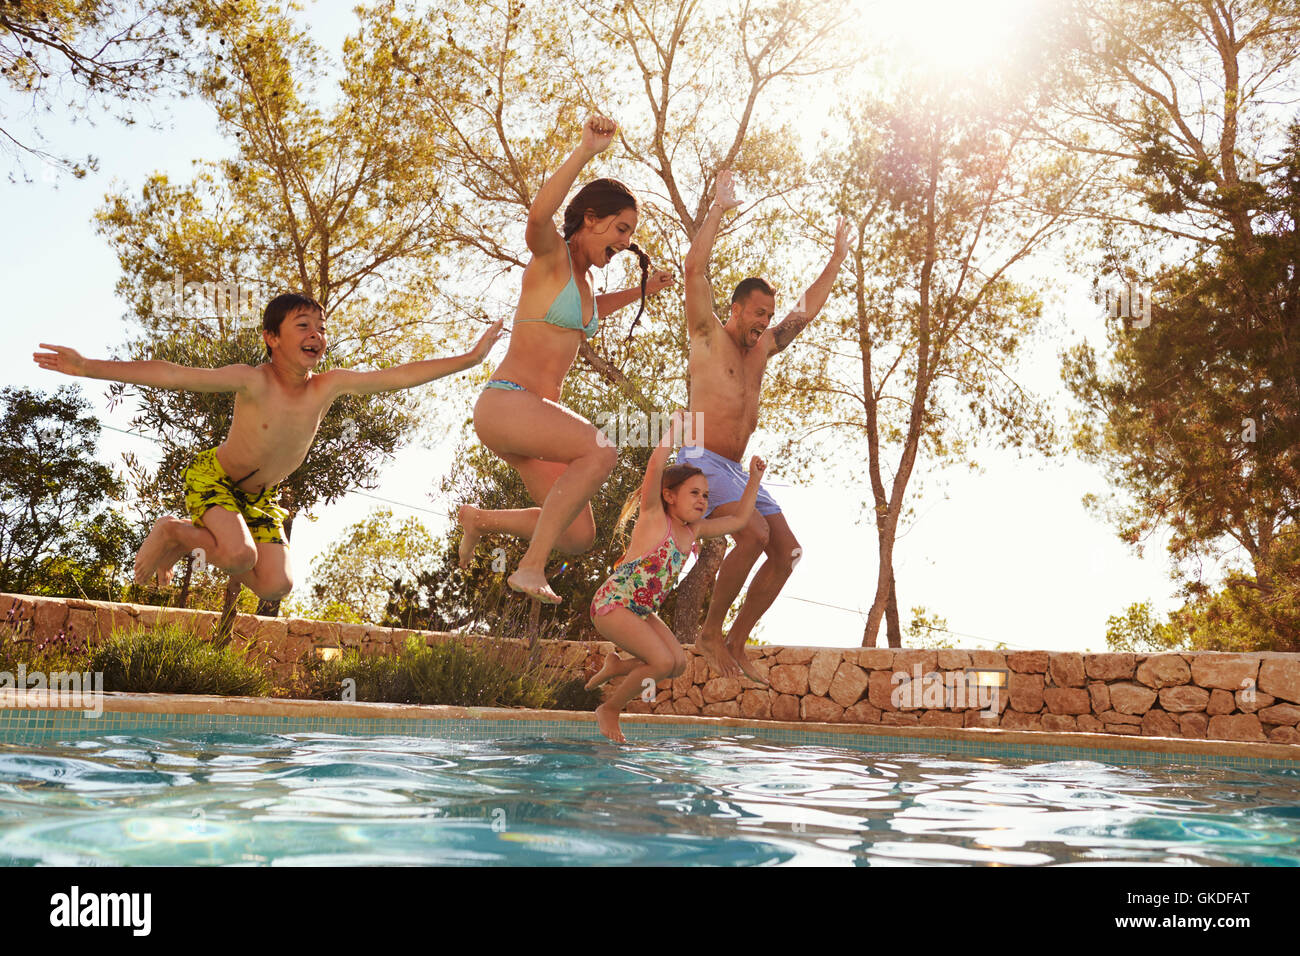 Family On Vacation Jumping Into Outdoor Pool Stock Photo